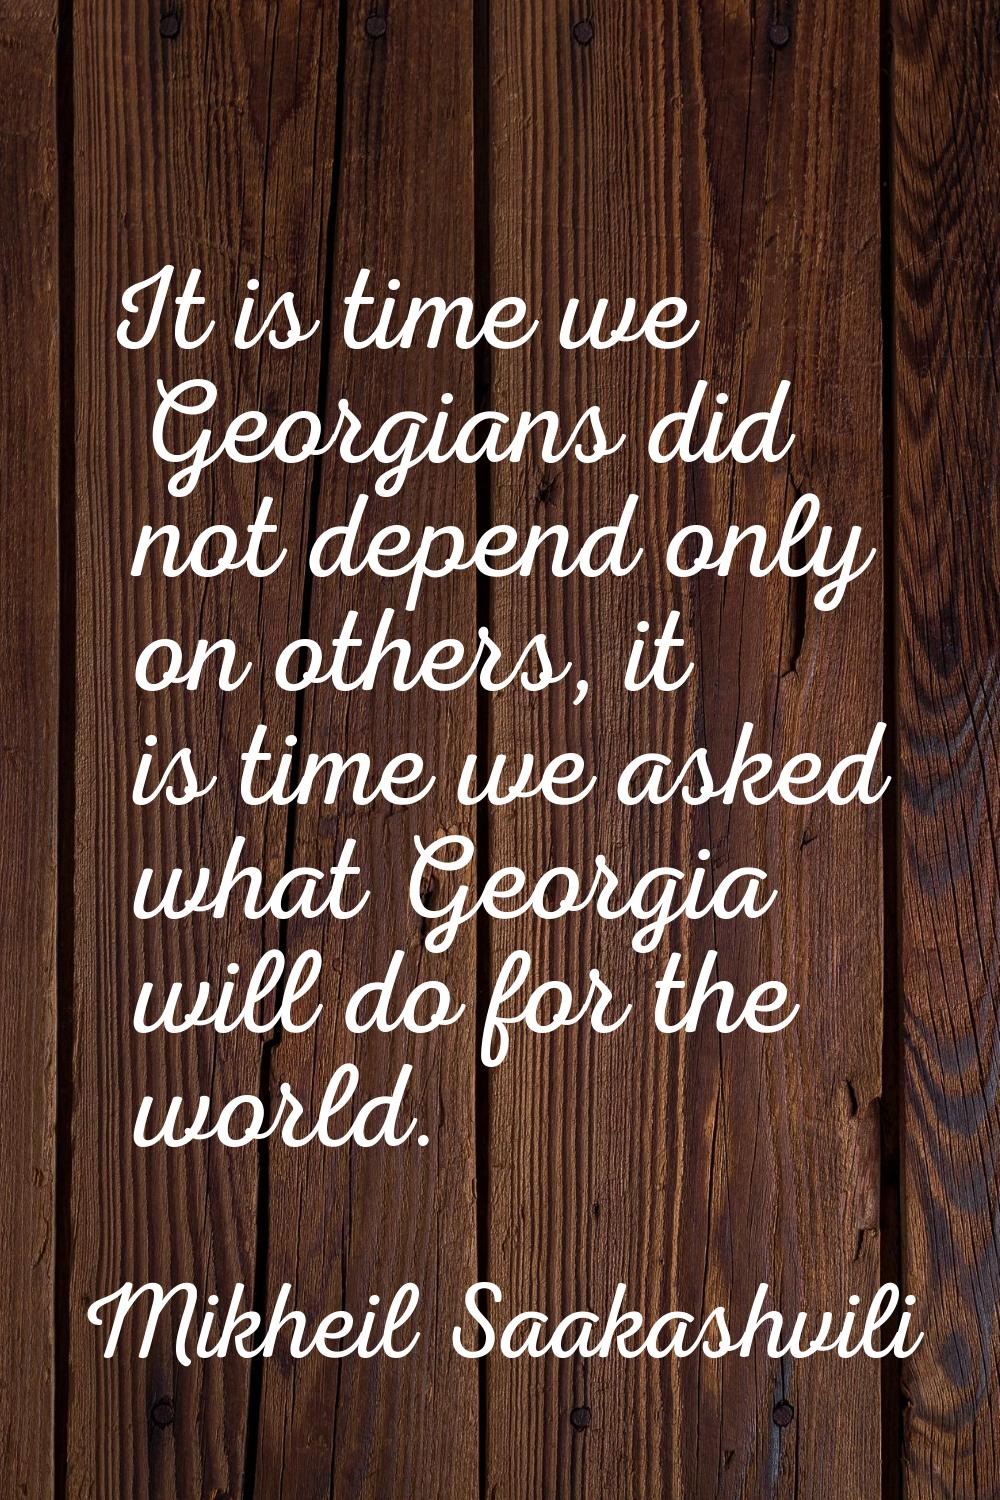 It is time we Georgians did not depend only on others, it is time we asked what Georgia will do for